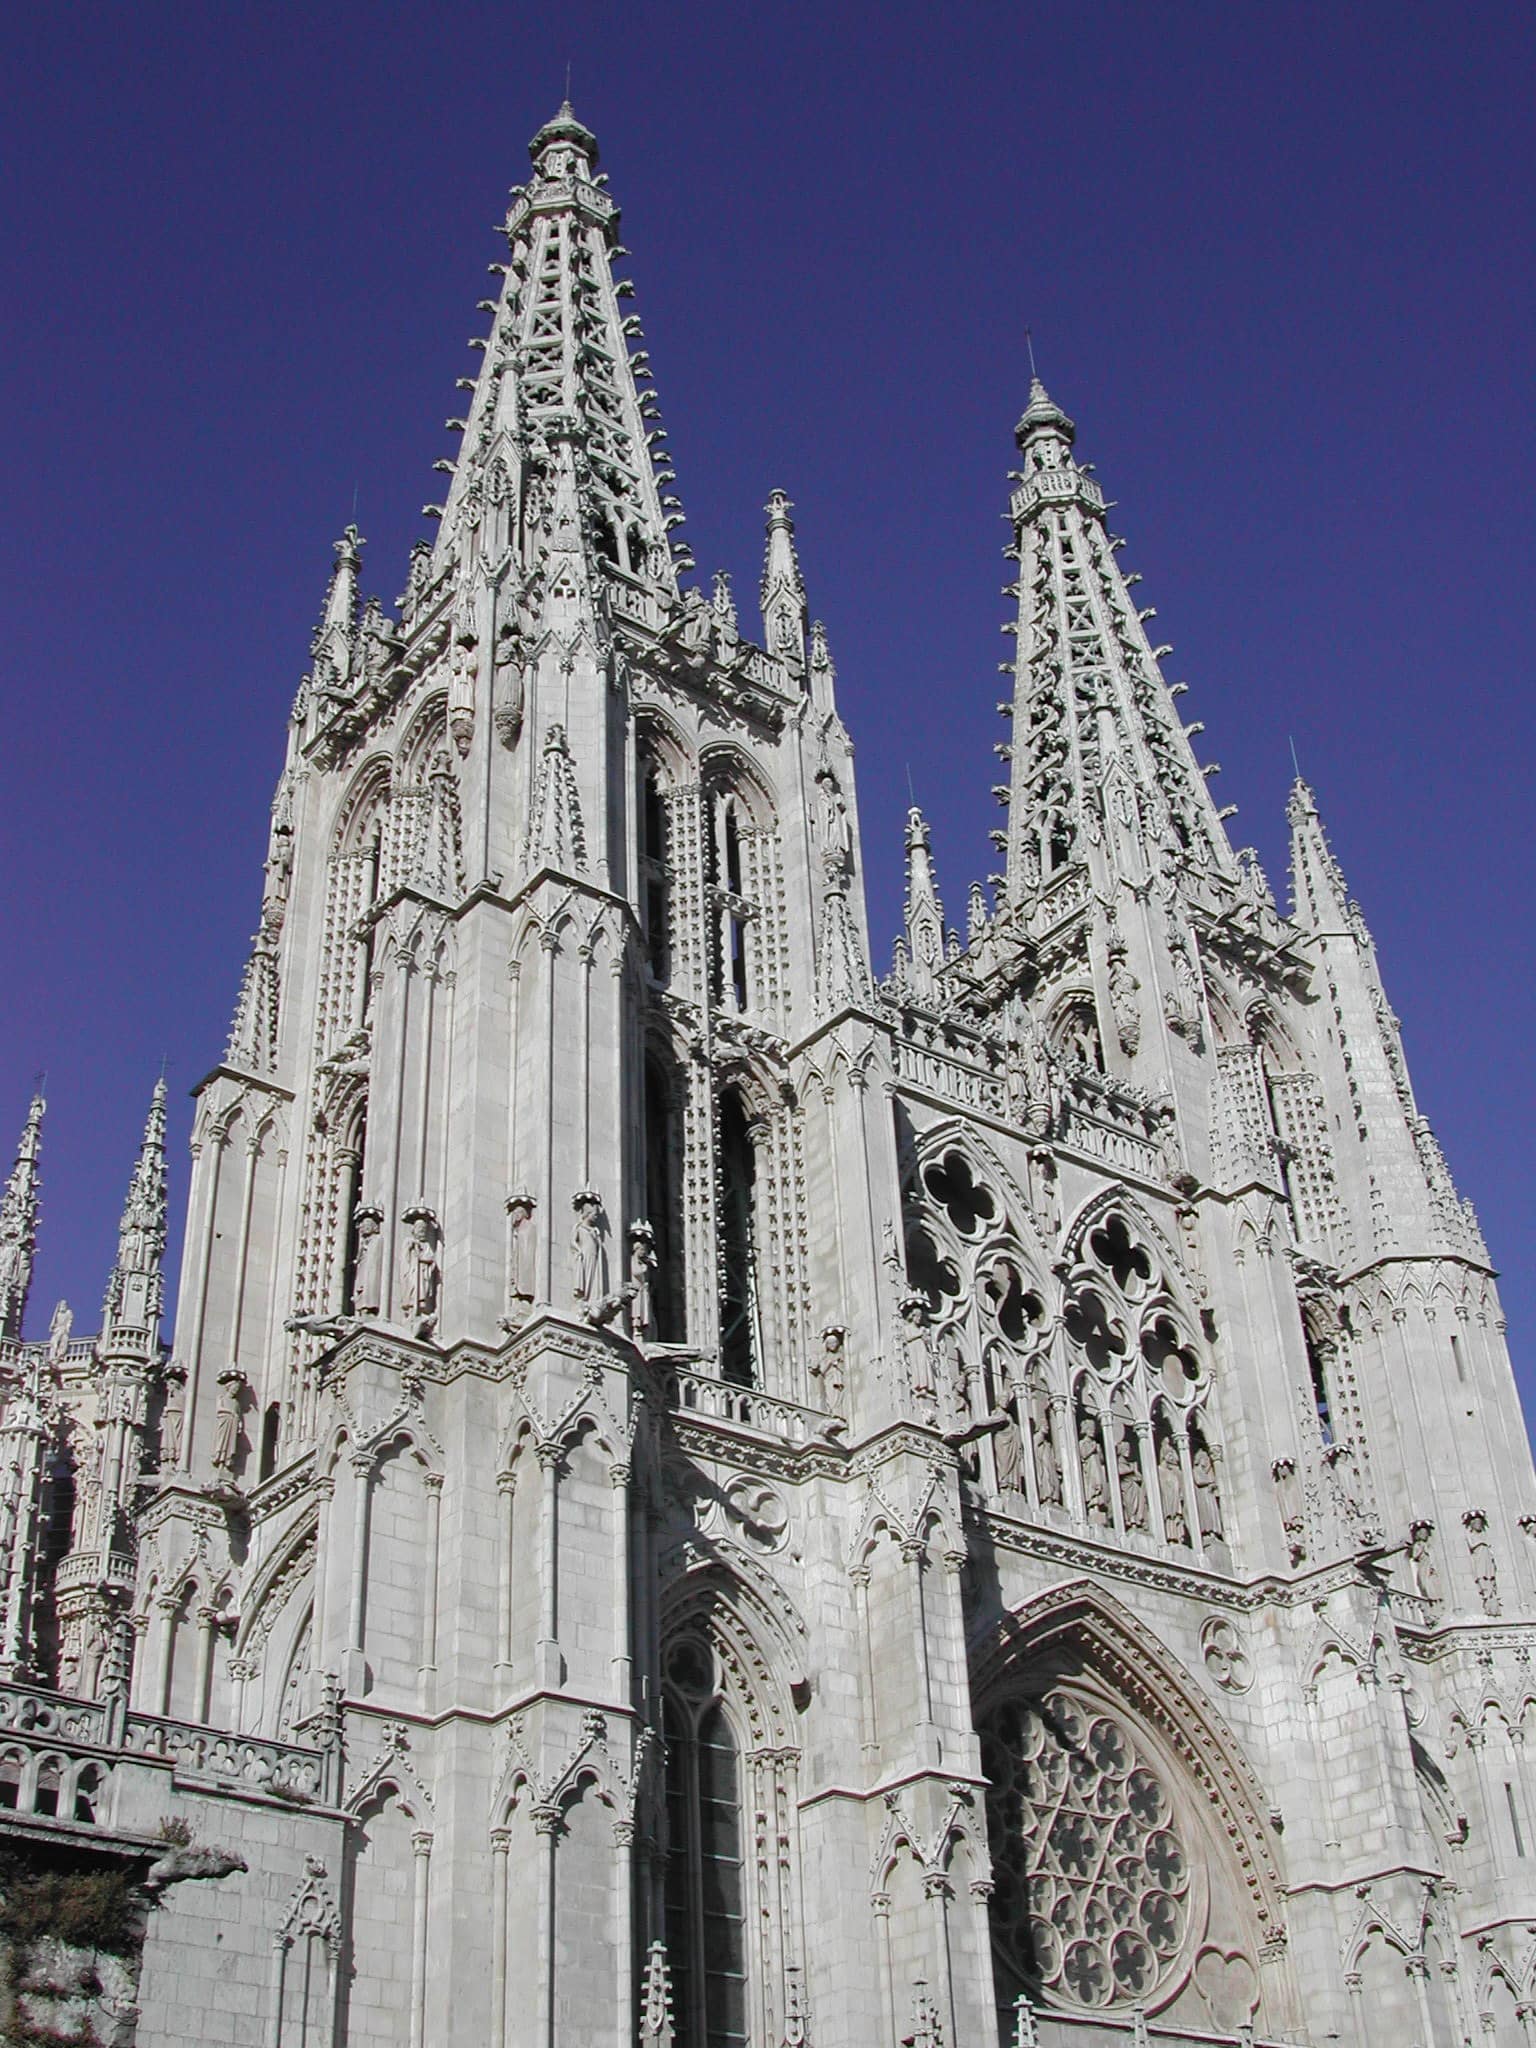 Cathedral of Burgos, Spain. Unmistakably High Gothic.